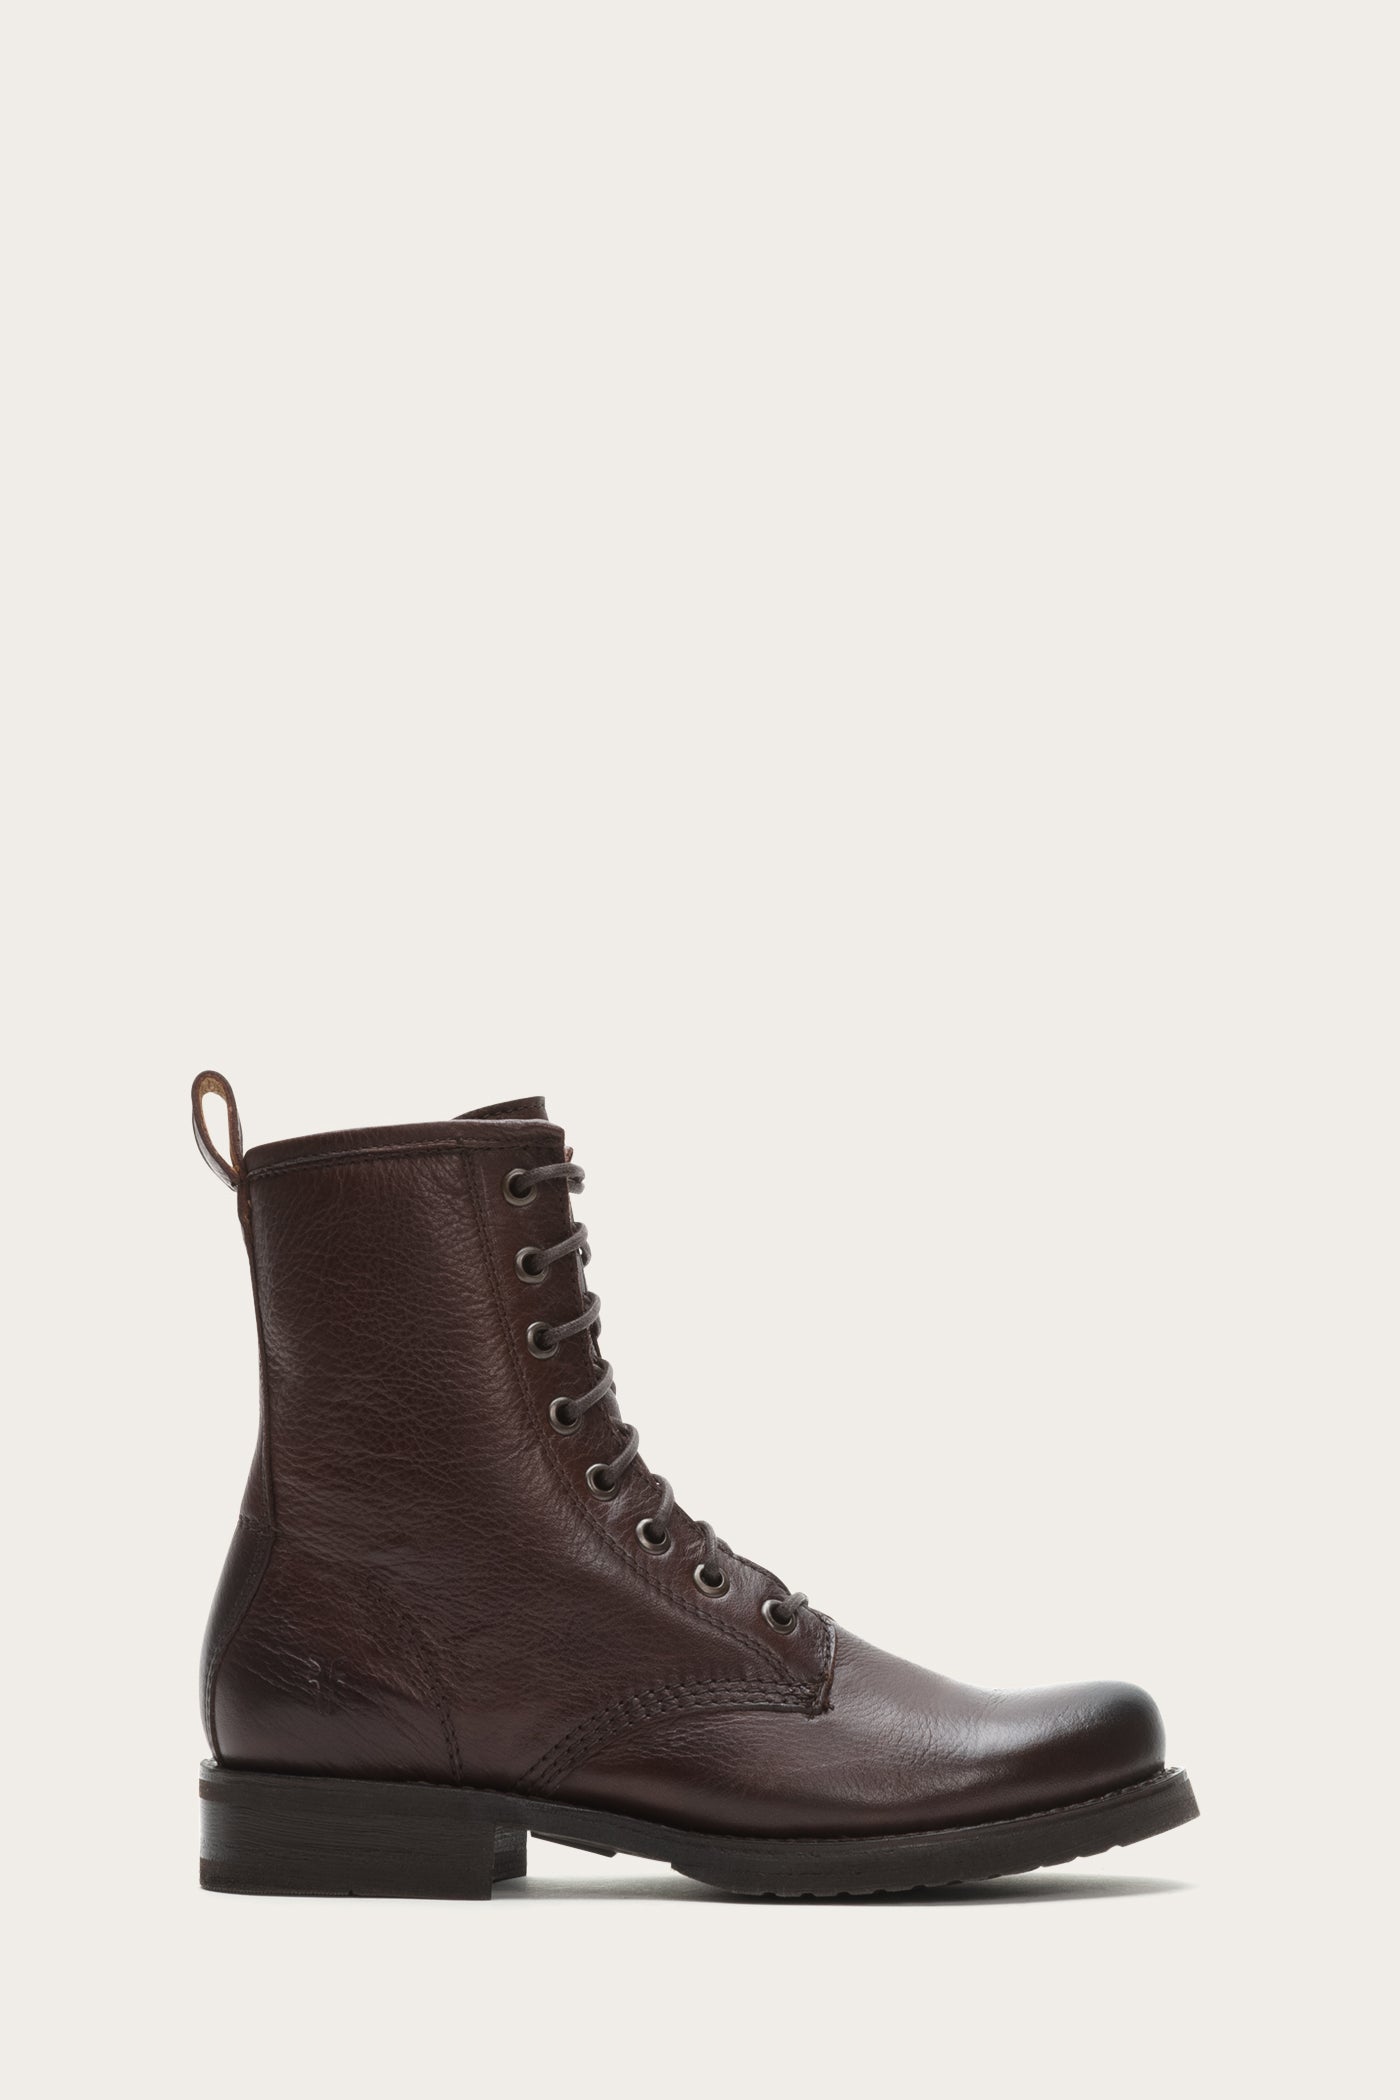 frye veronica lace up